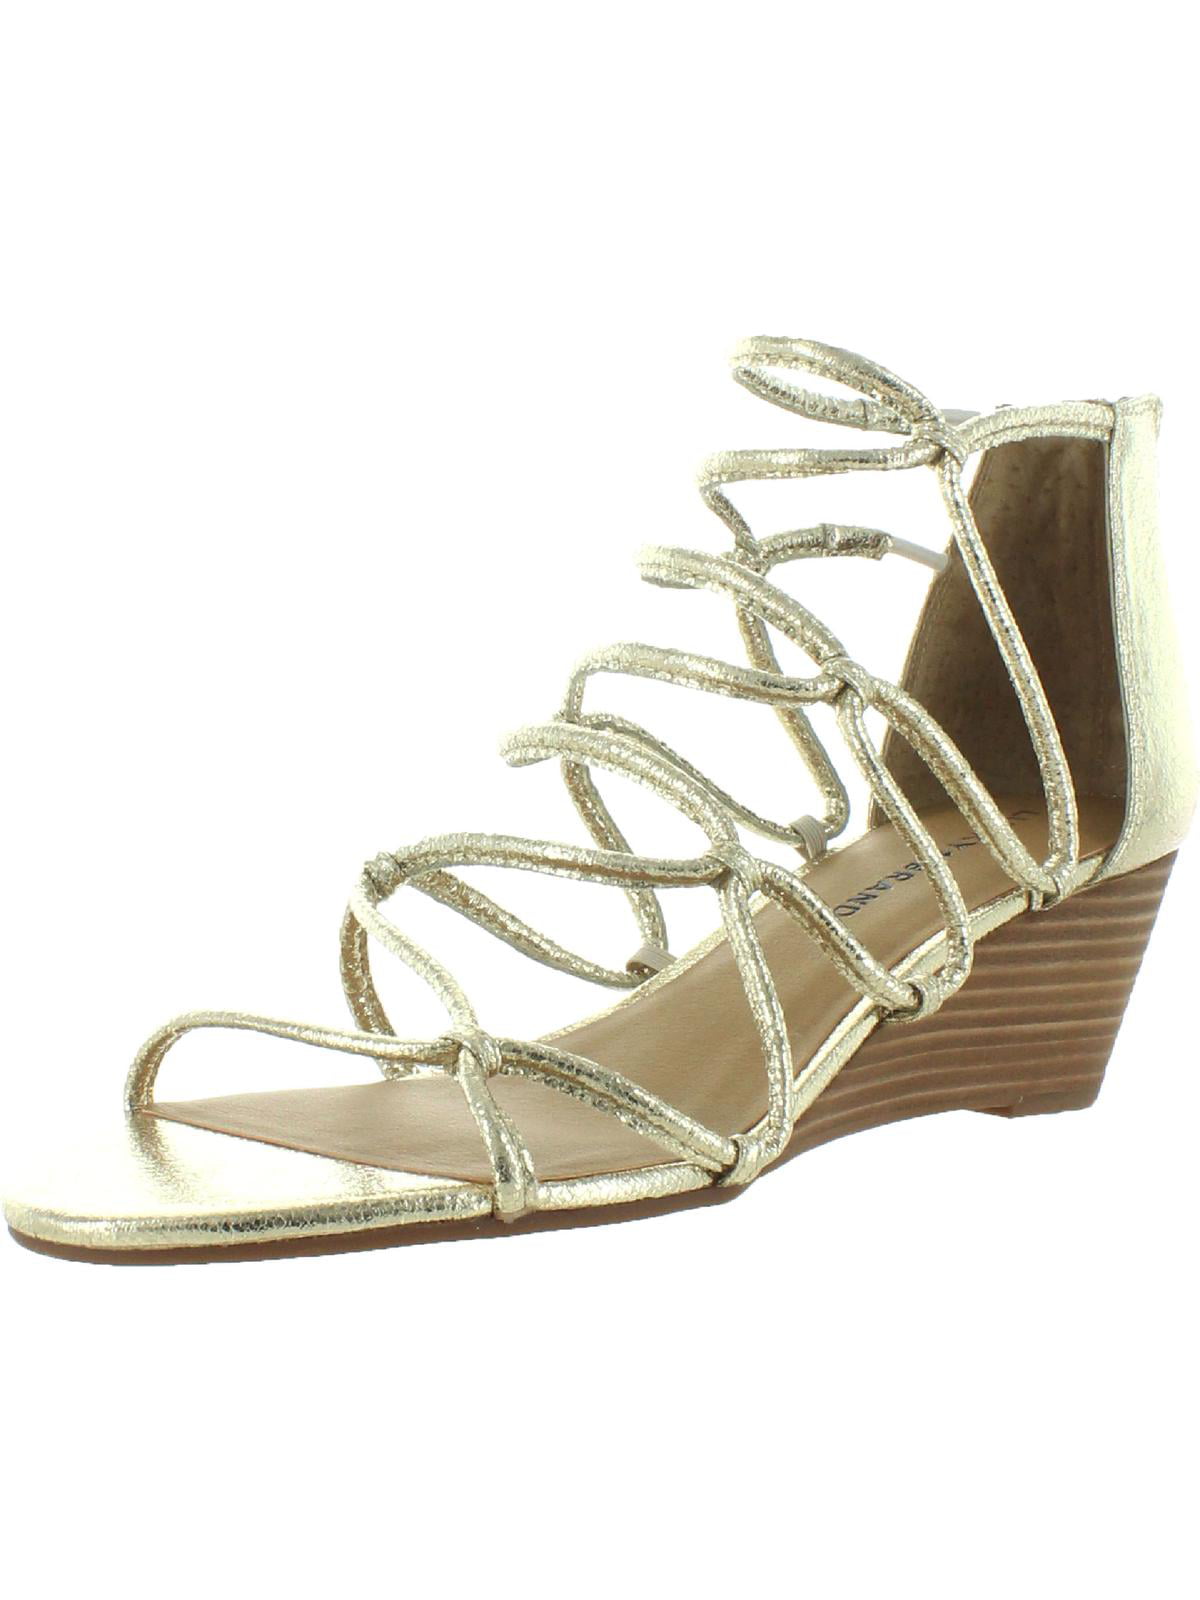 Details about   Lucky Brand Women's Jilses Positano Ankle-High Leather Wedged Sandal 